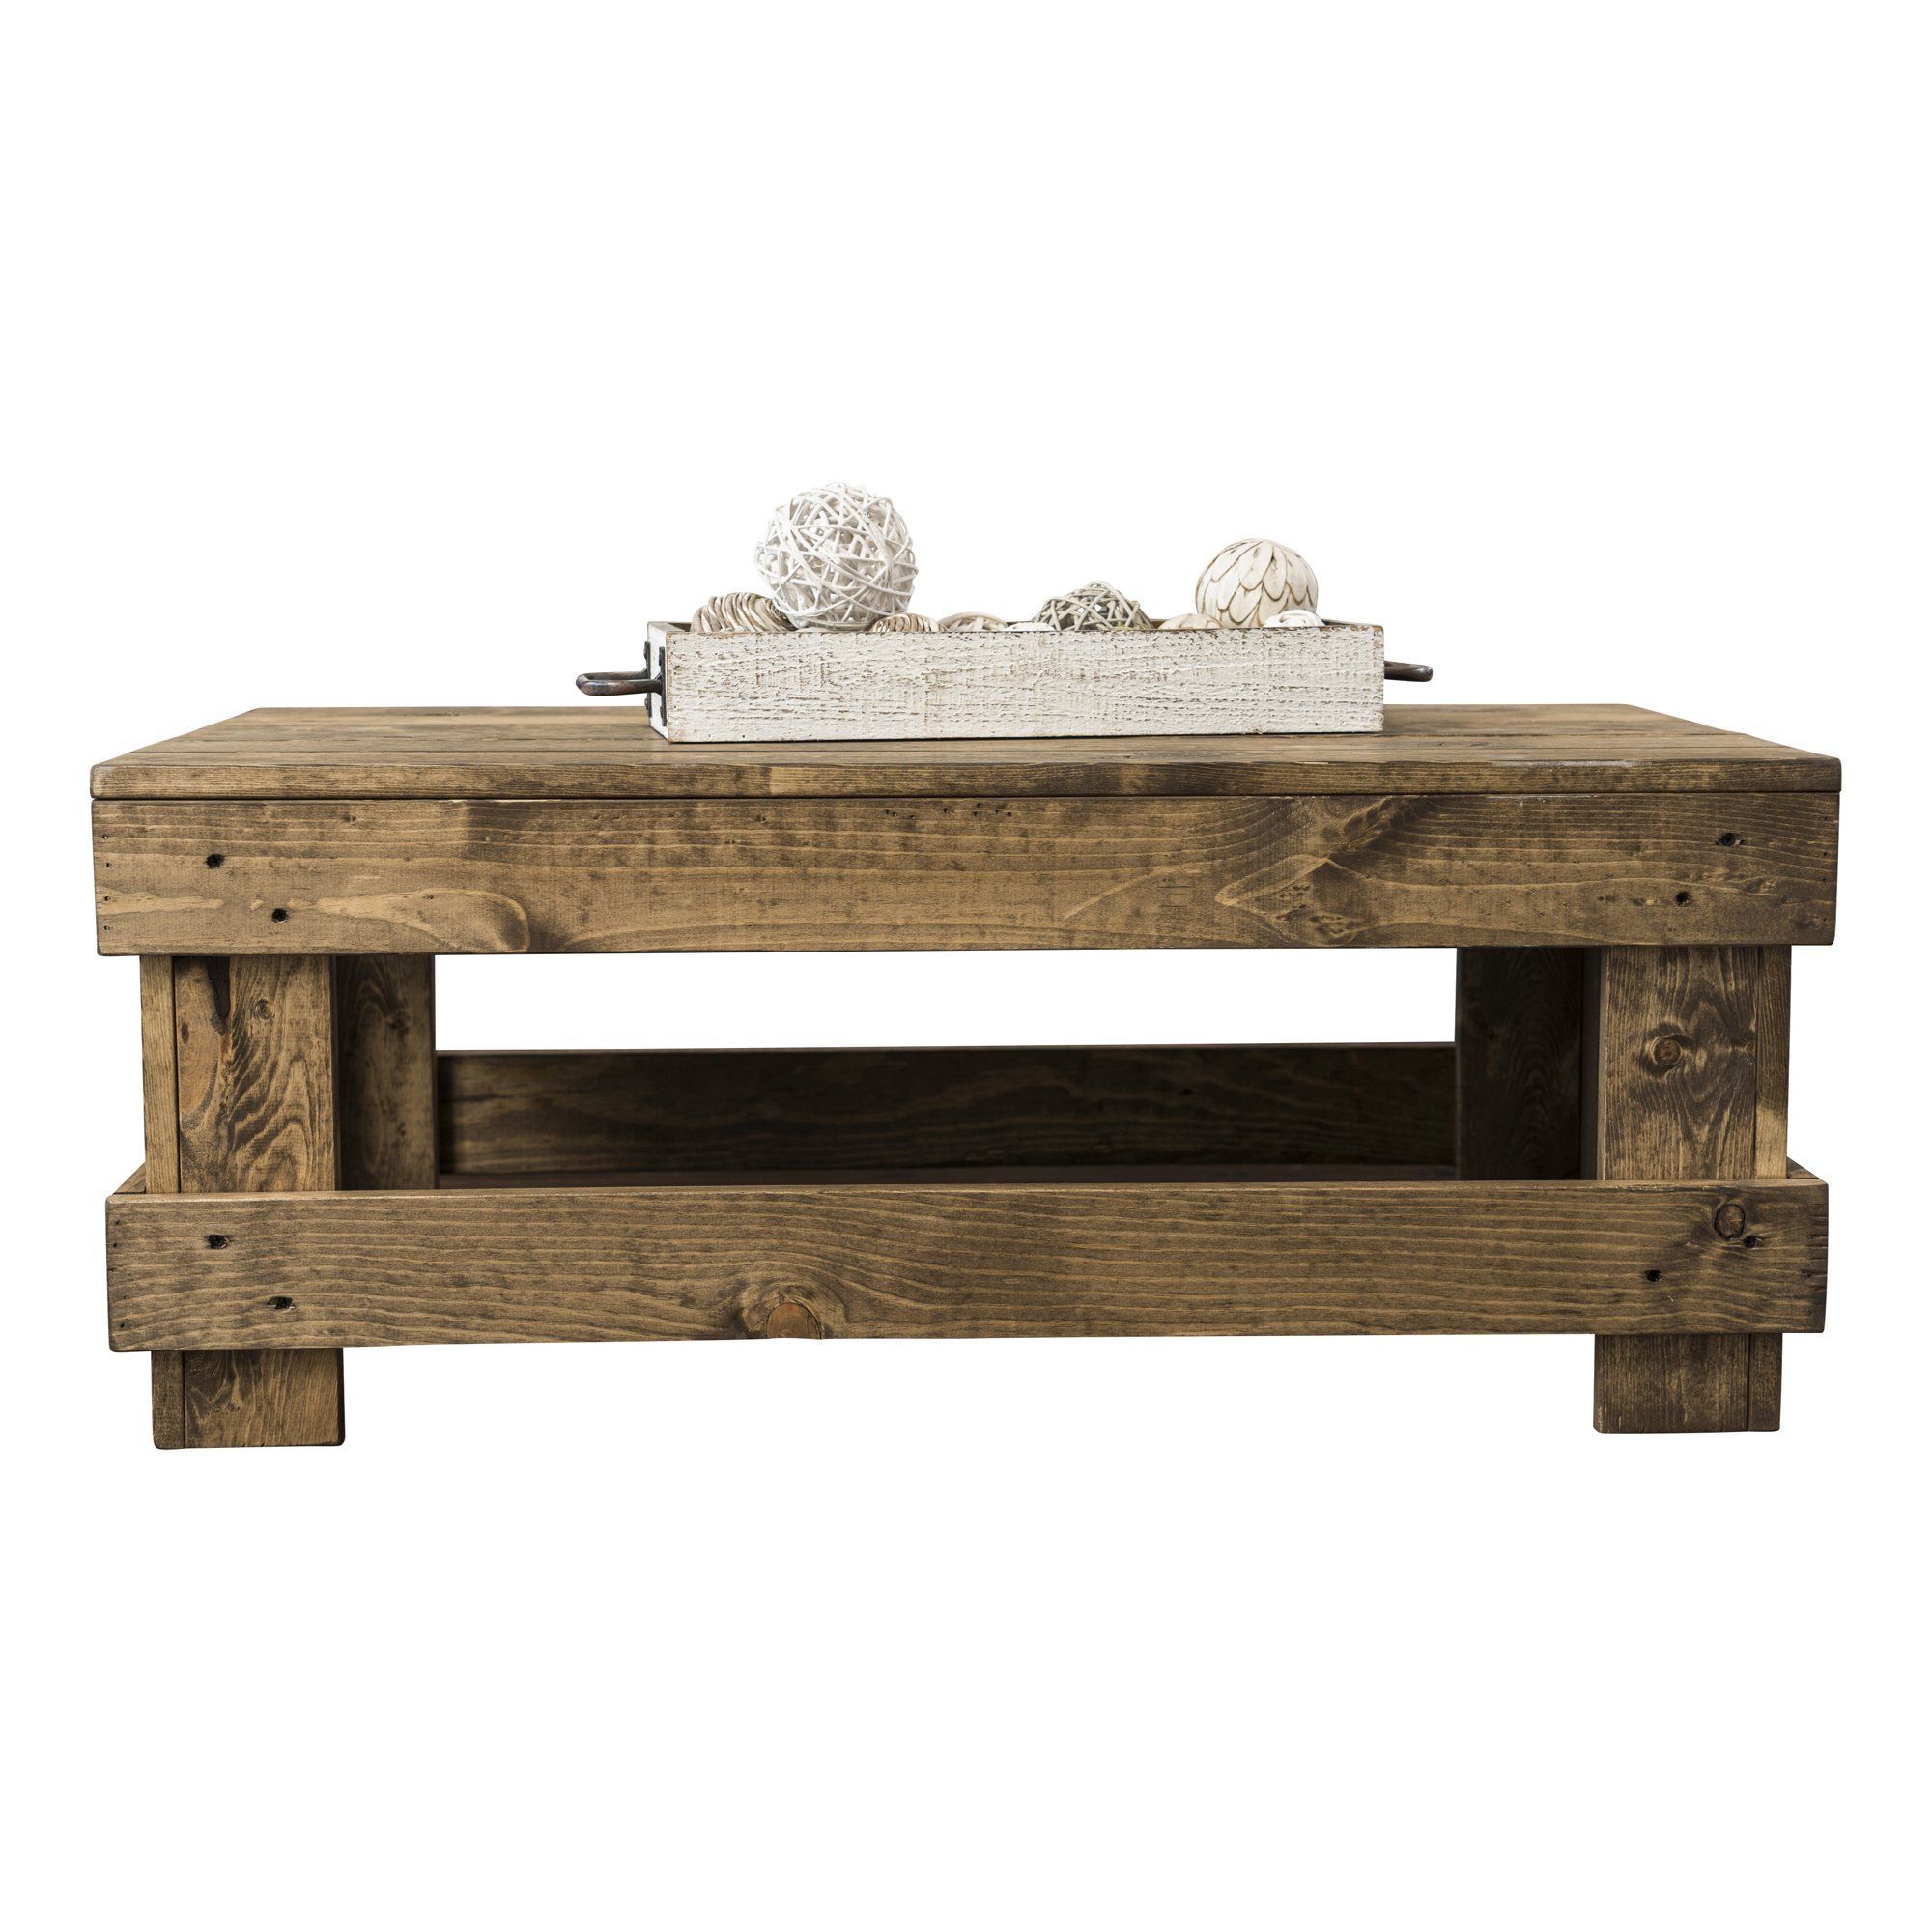 Woven Paths Landmark Pine Solid Wood Farmhouse Coffee Table, Dark With Woven Paths Coffee Tables (Gallery 4 of 20)